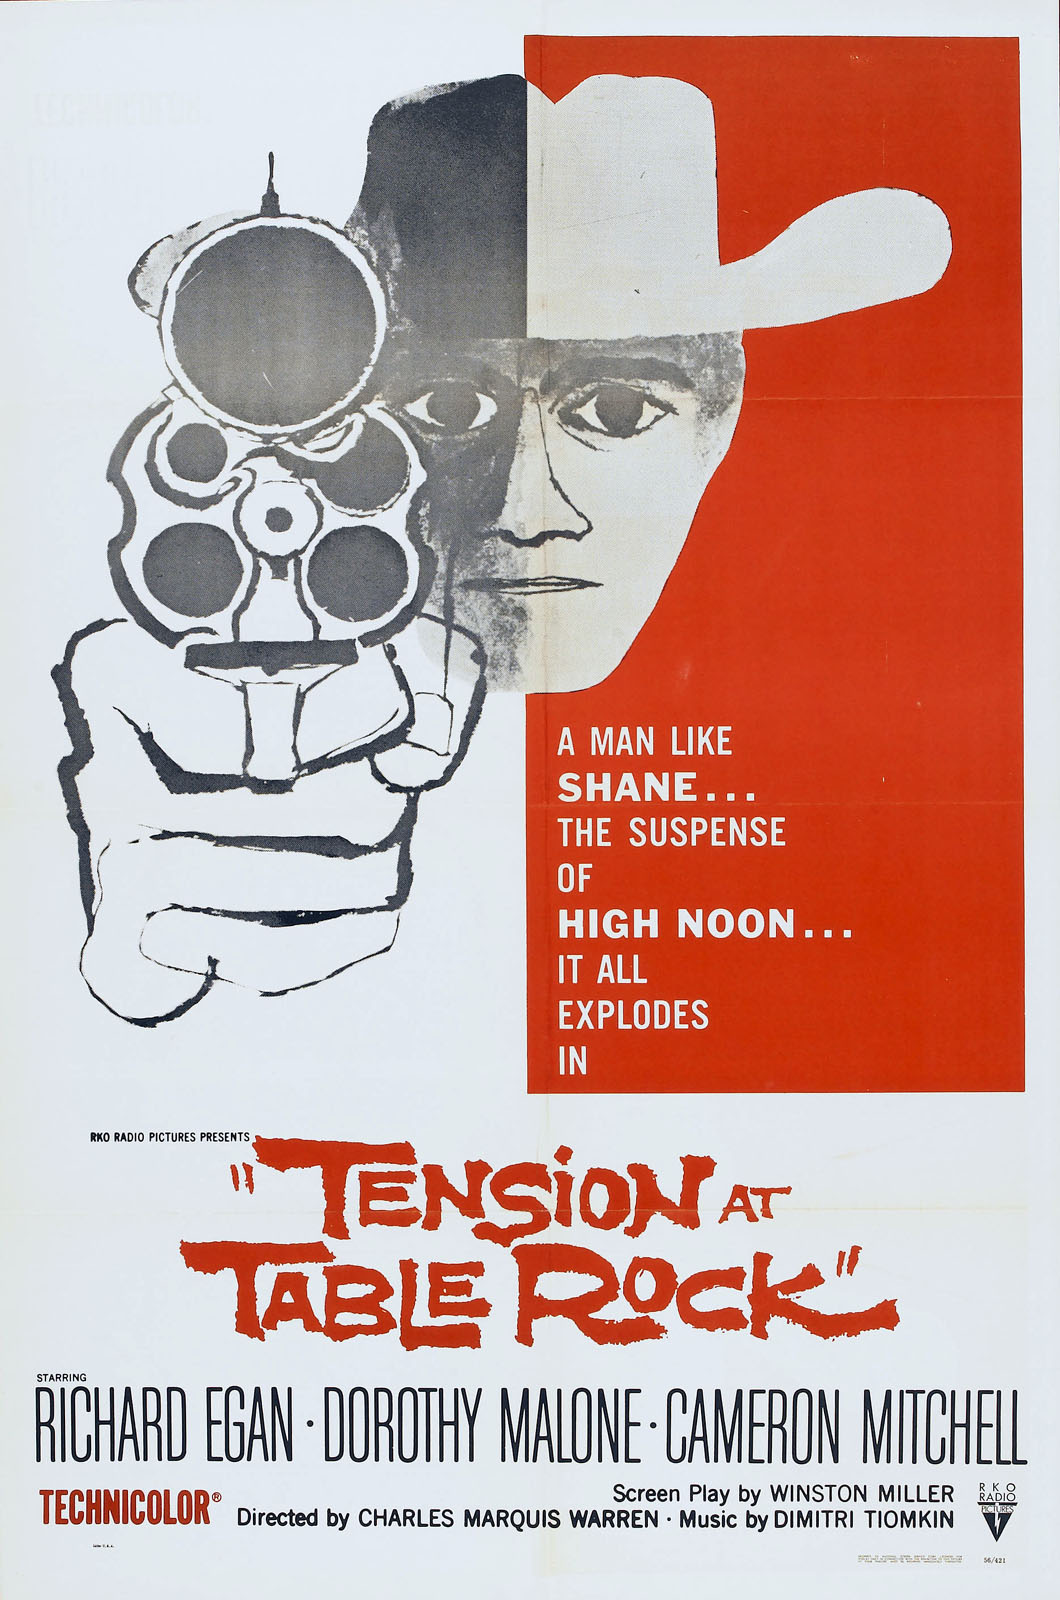 TENSION AT TABLE ROCK